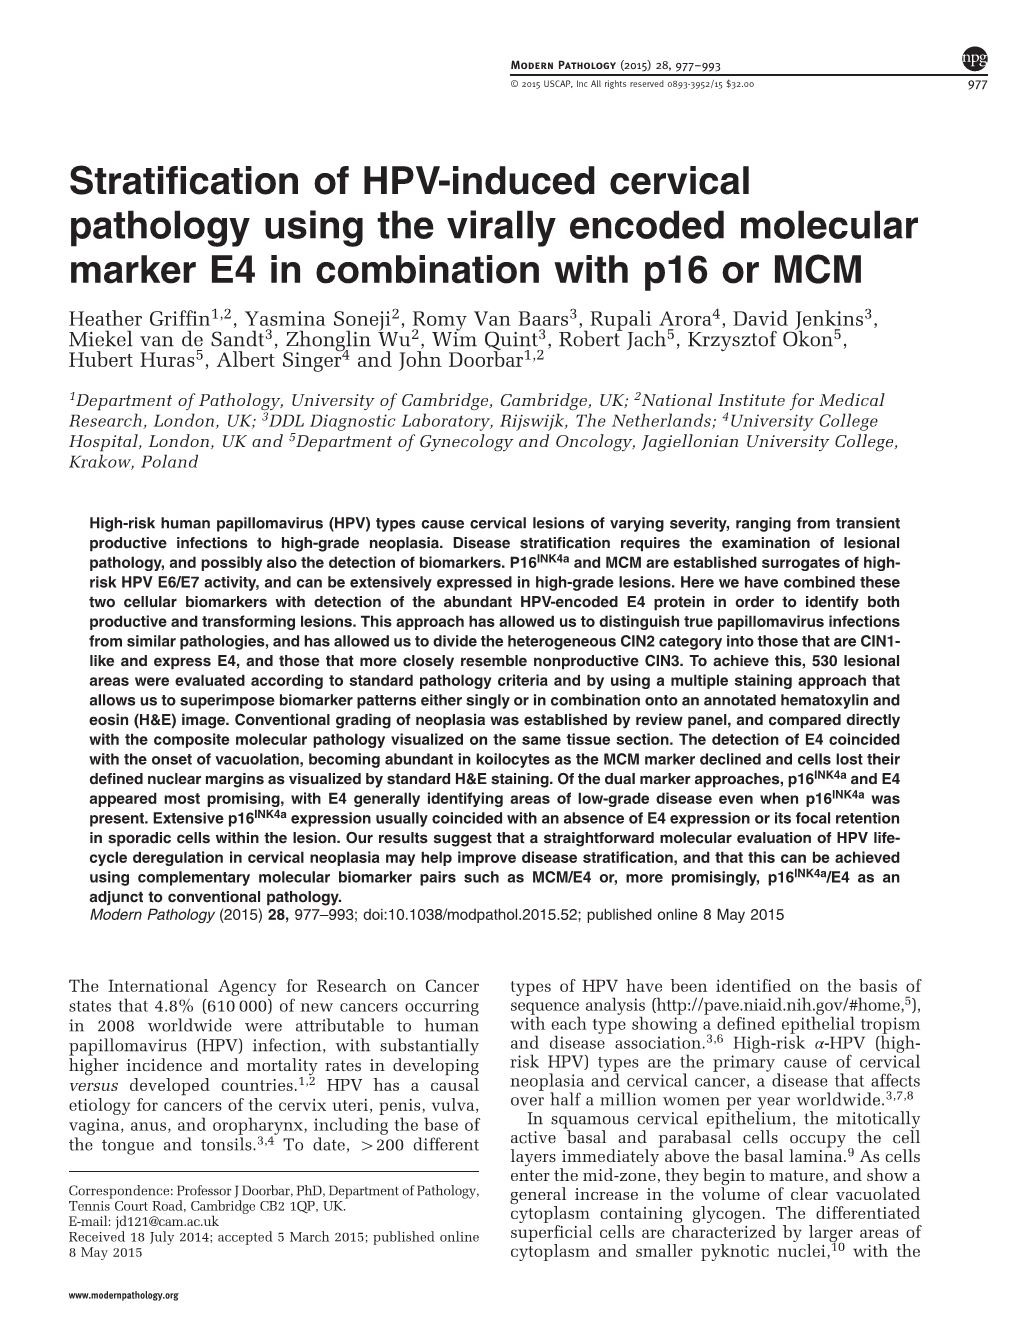 Stratification of HPV-Induced Cervical Pathology Using the Virally Encoded